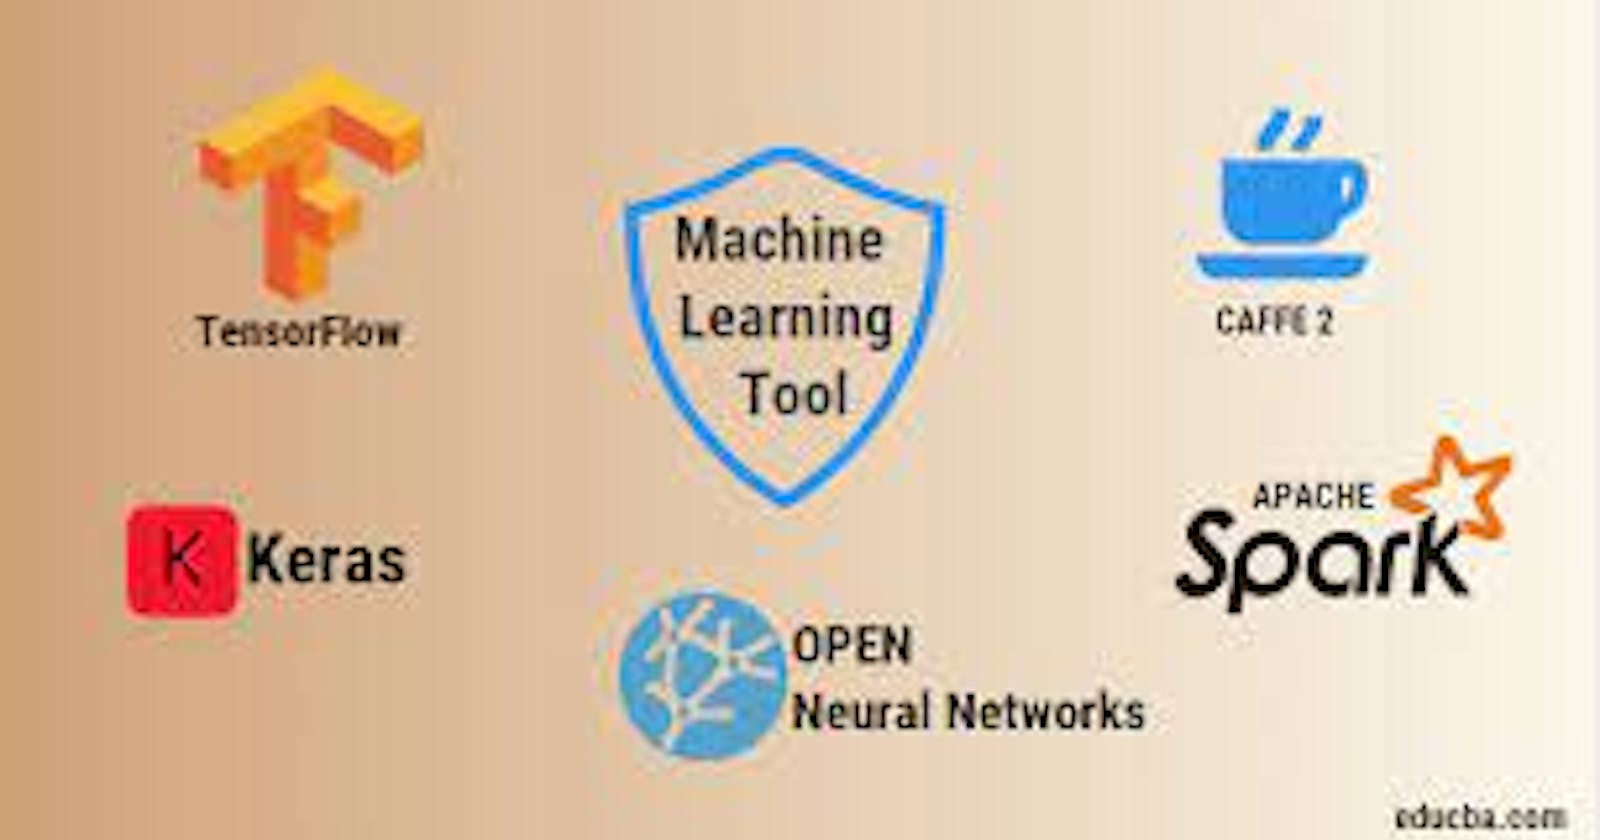 Amazing machine learning and open source tools and their functions.